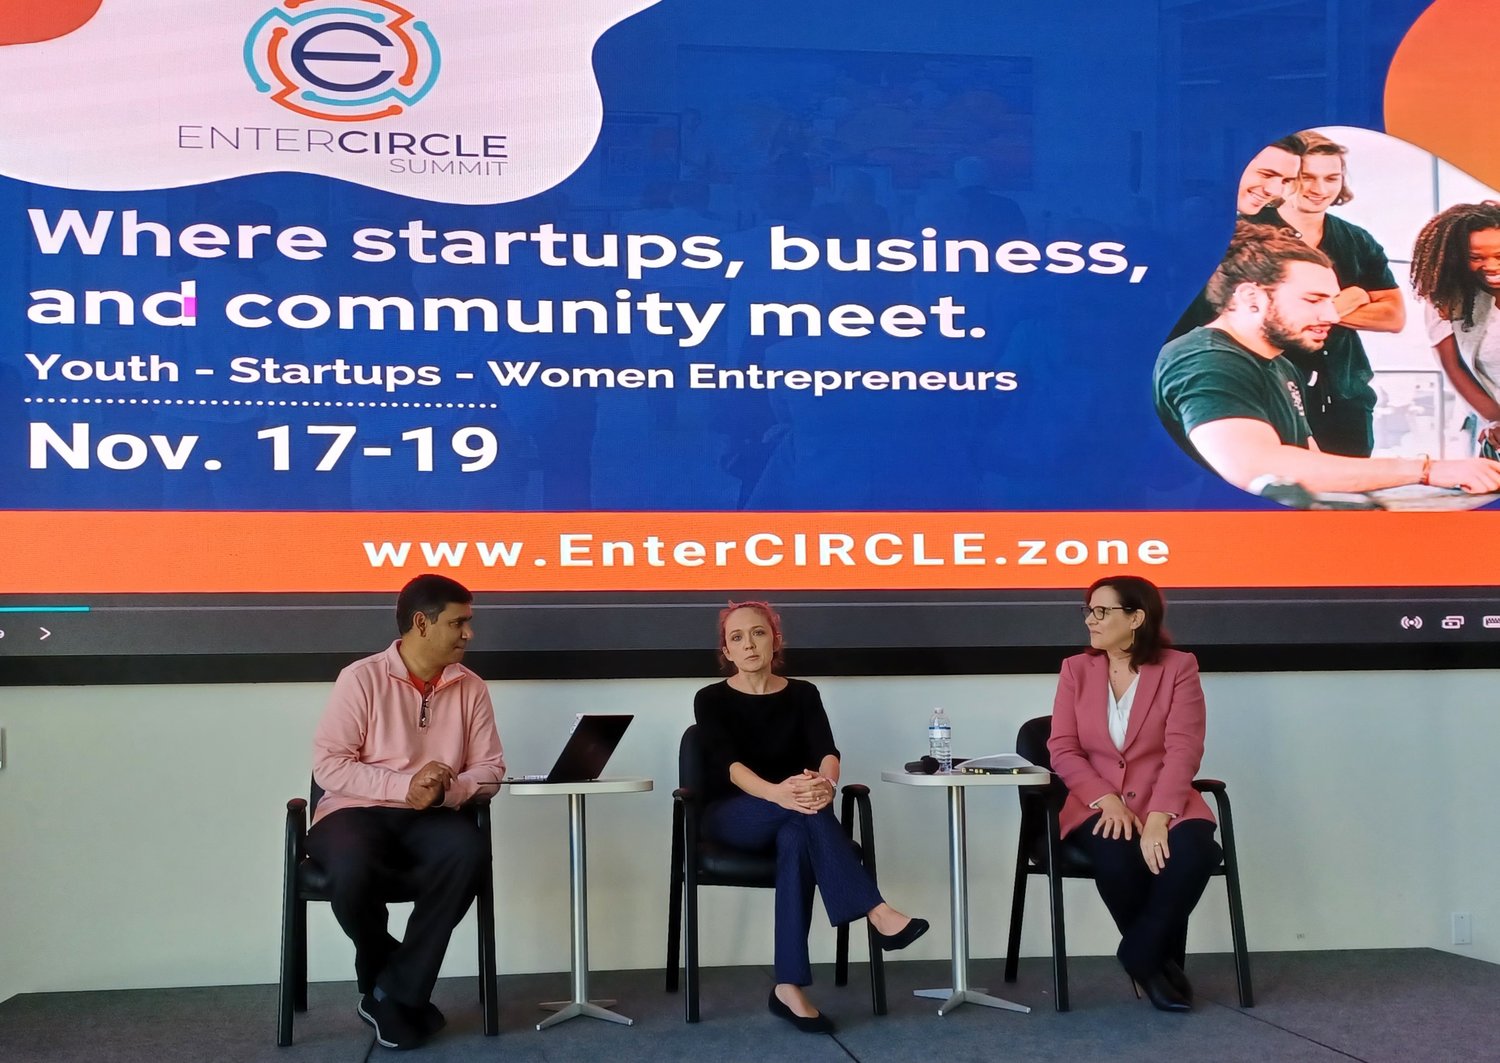 Link founder Raghu Misra, Tourist Development Council executive director Tera Meeks and Chamber president and CEO Isabel Renault, from left, discuss the upcoming ENTERCIRCLE 2021 Summit.